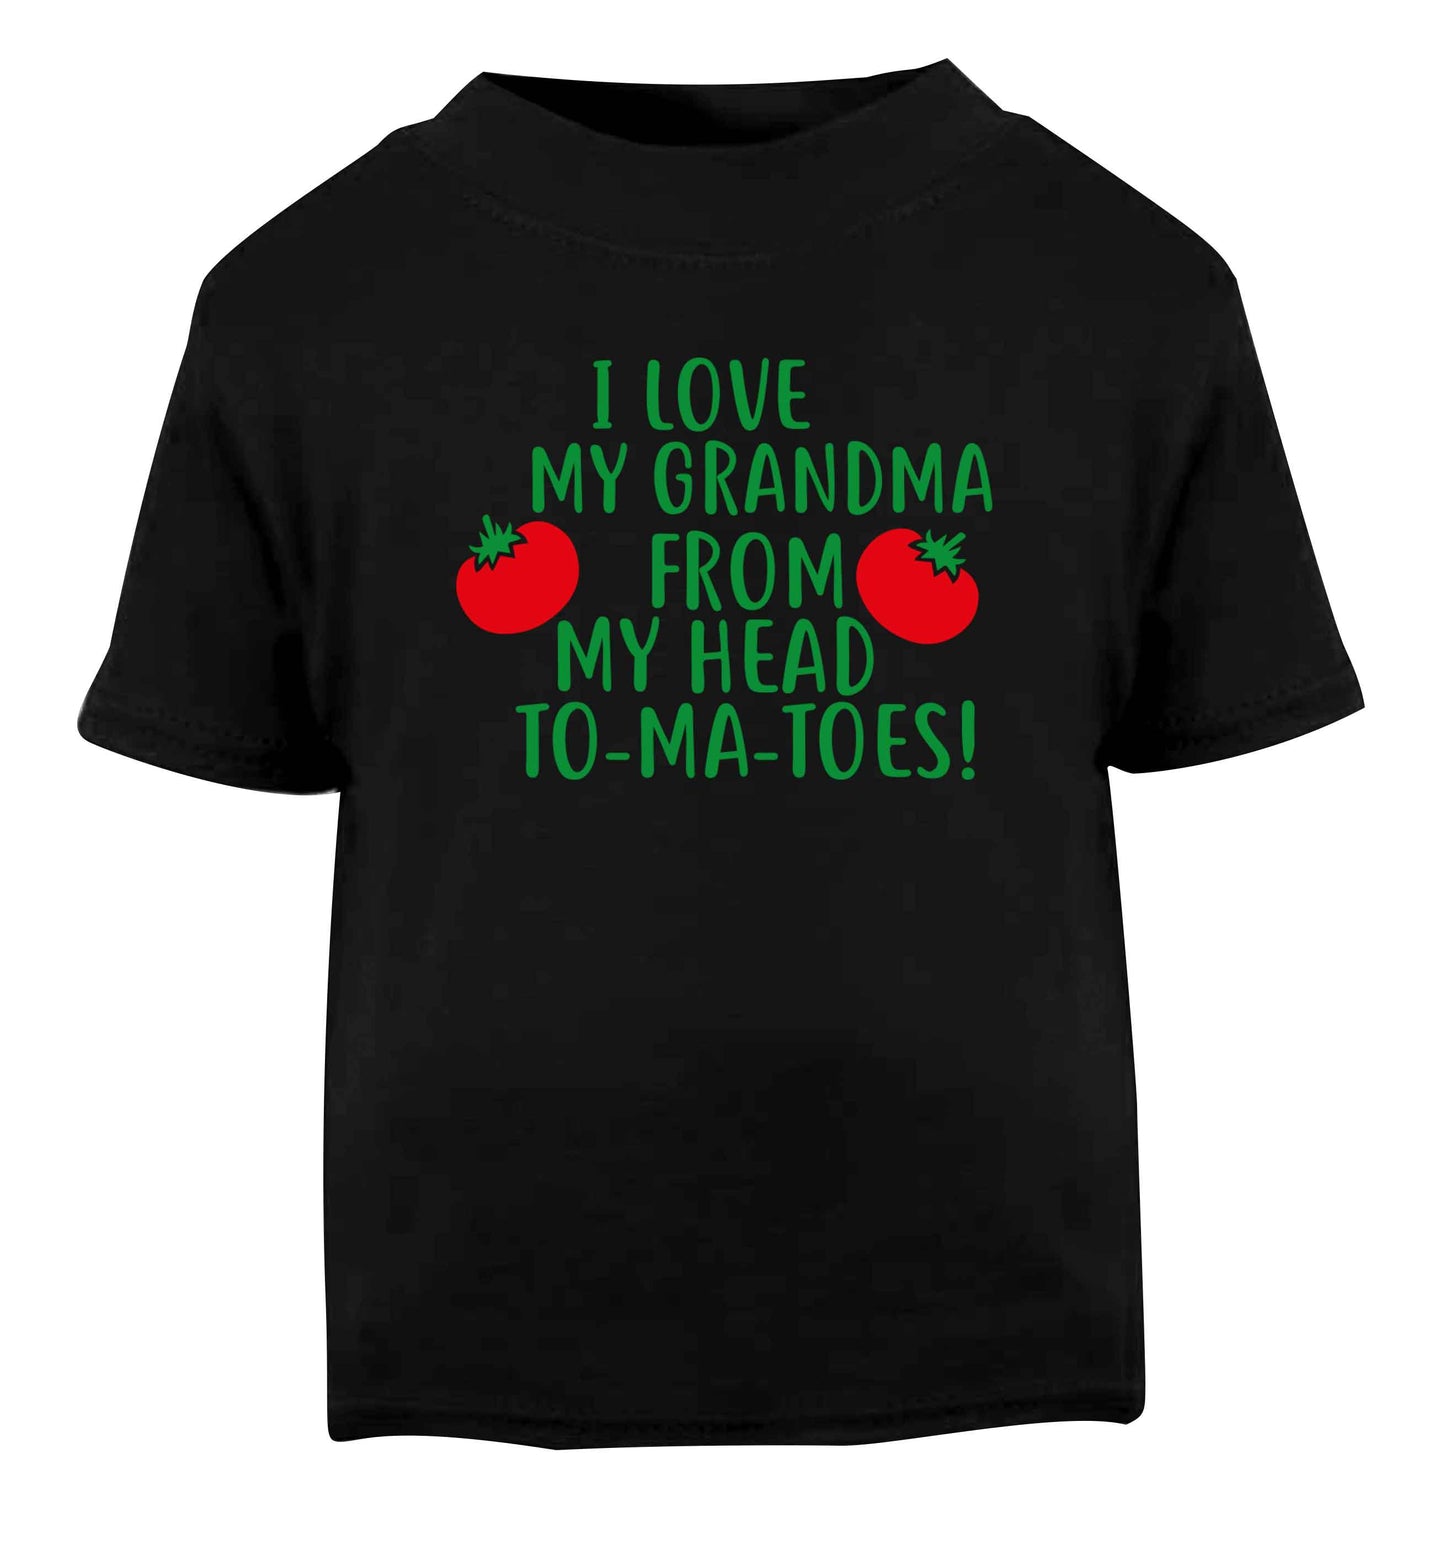 I love my grandma from my head to-ma-toes Black Baby Toddler Tshirt 2 years